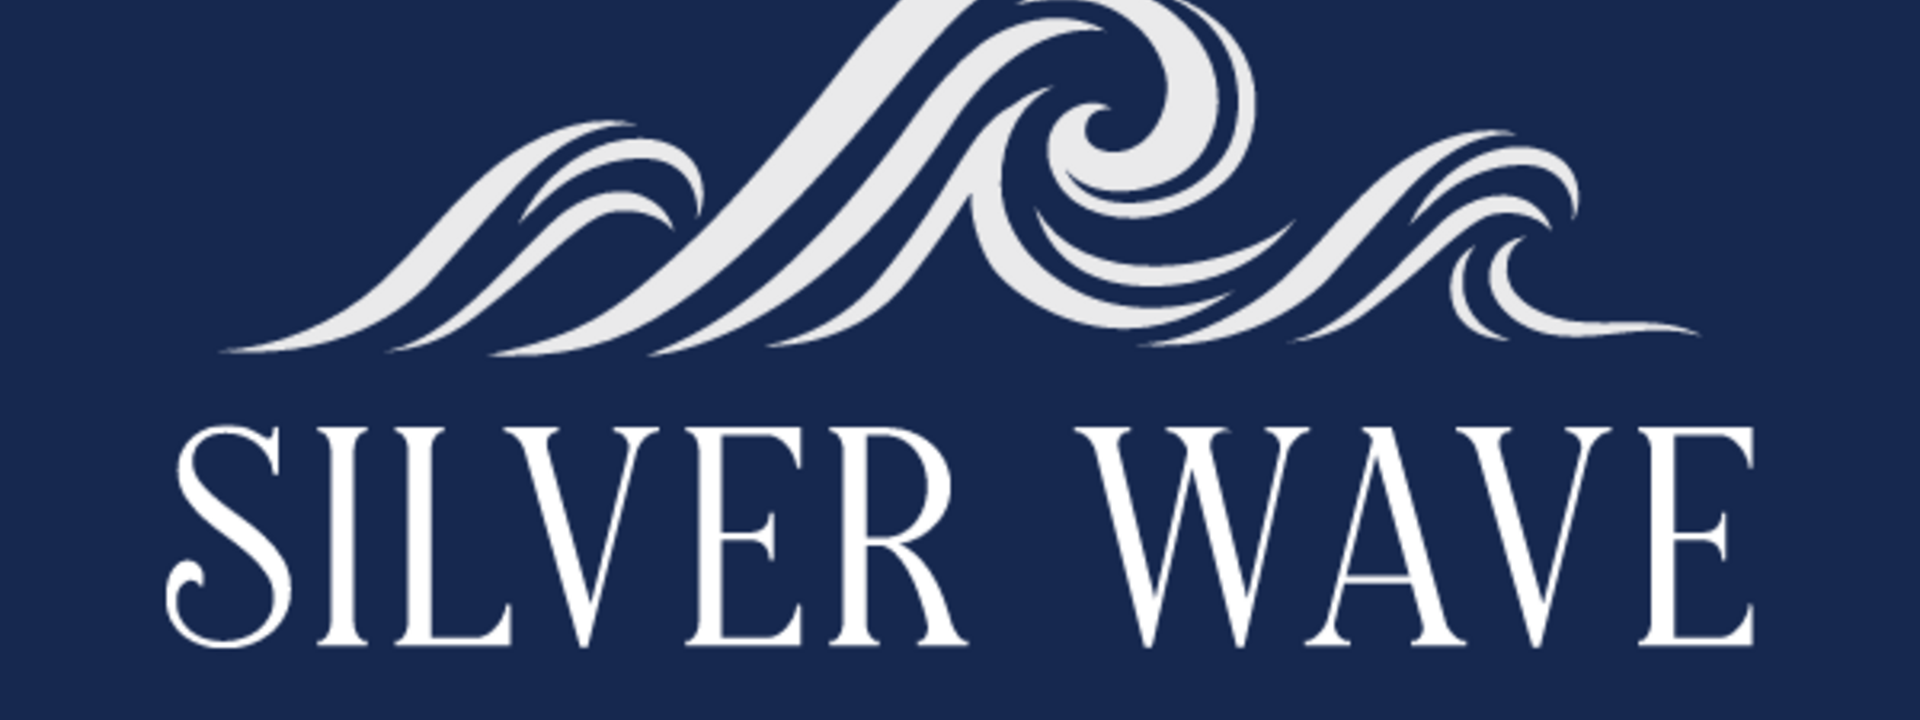 Silver Wave Logo (600 × 600 px).png